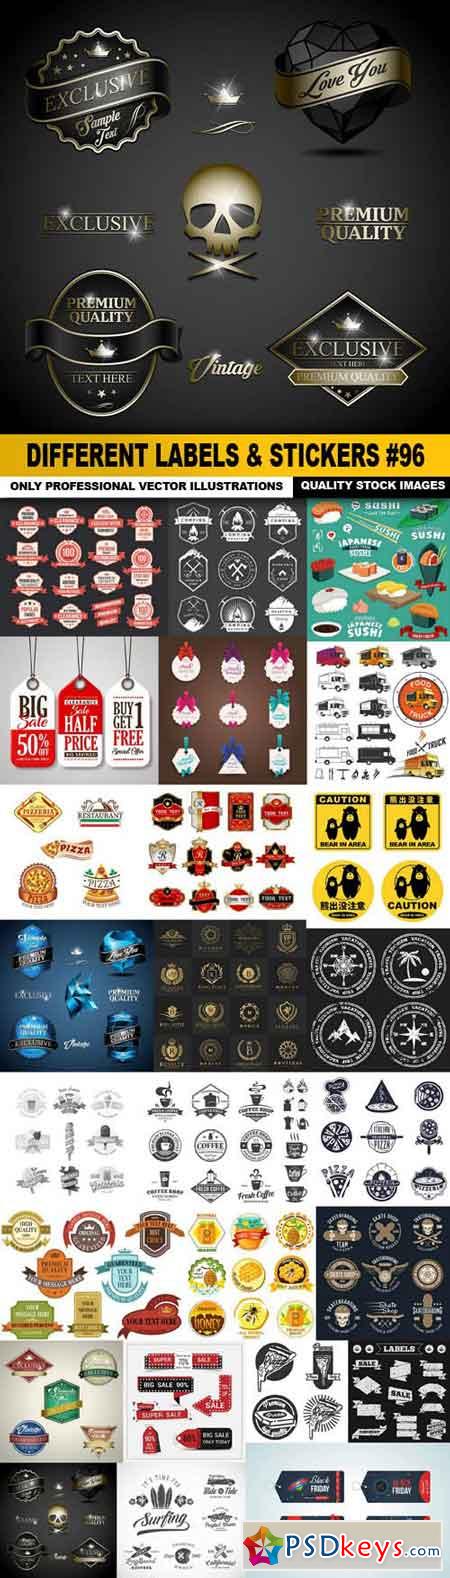 Different Labels & Stickers #96 - 25 Vector